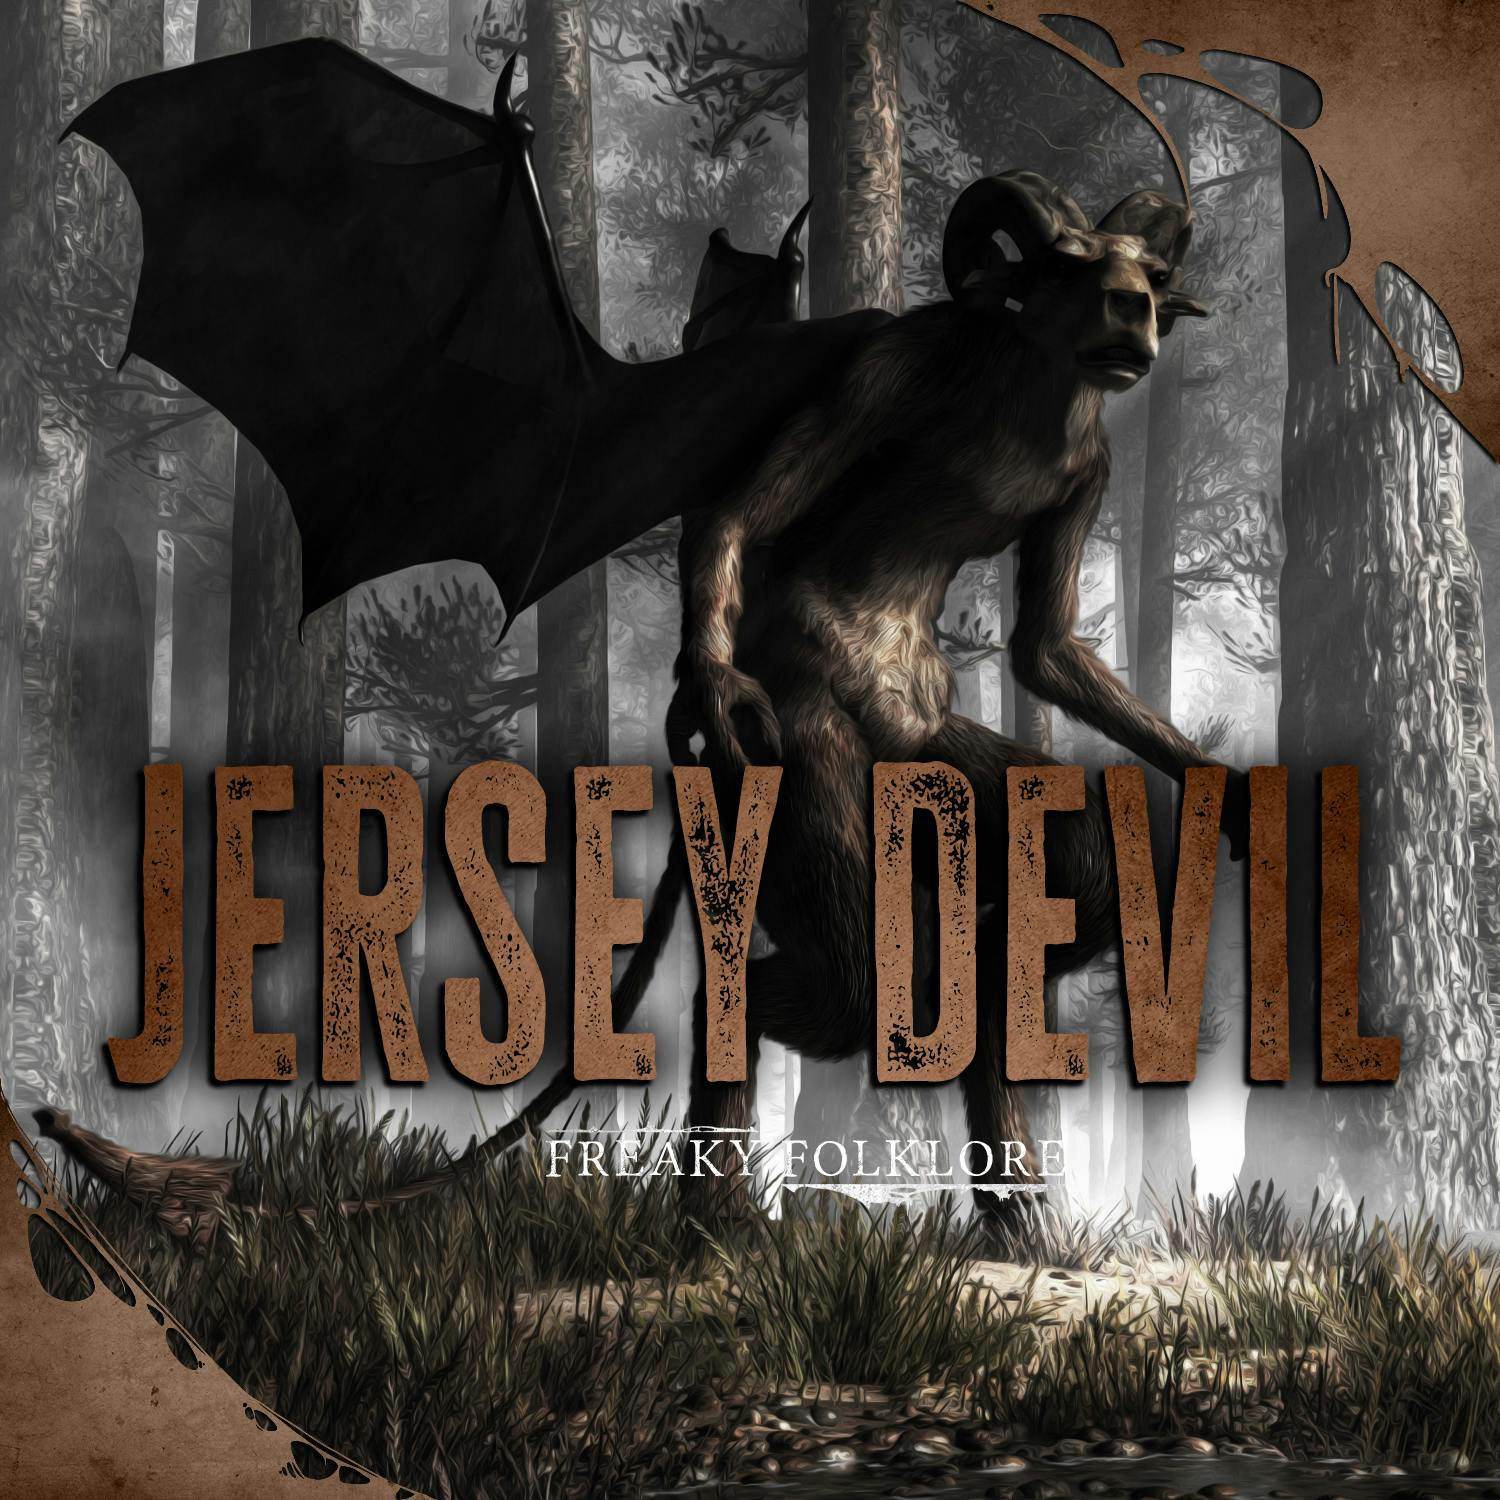 Jersey Devil - The Demon of the Pine Barrens